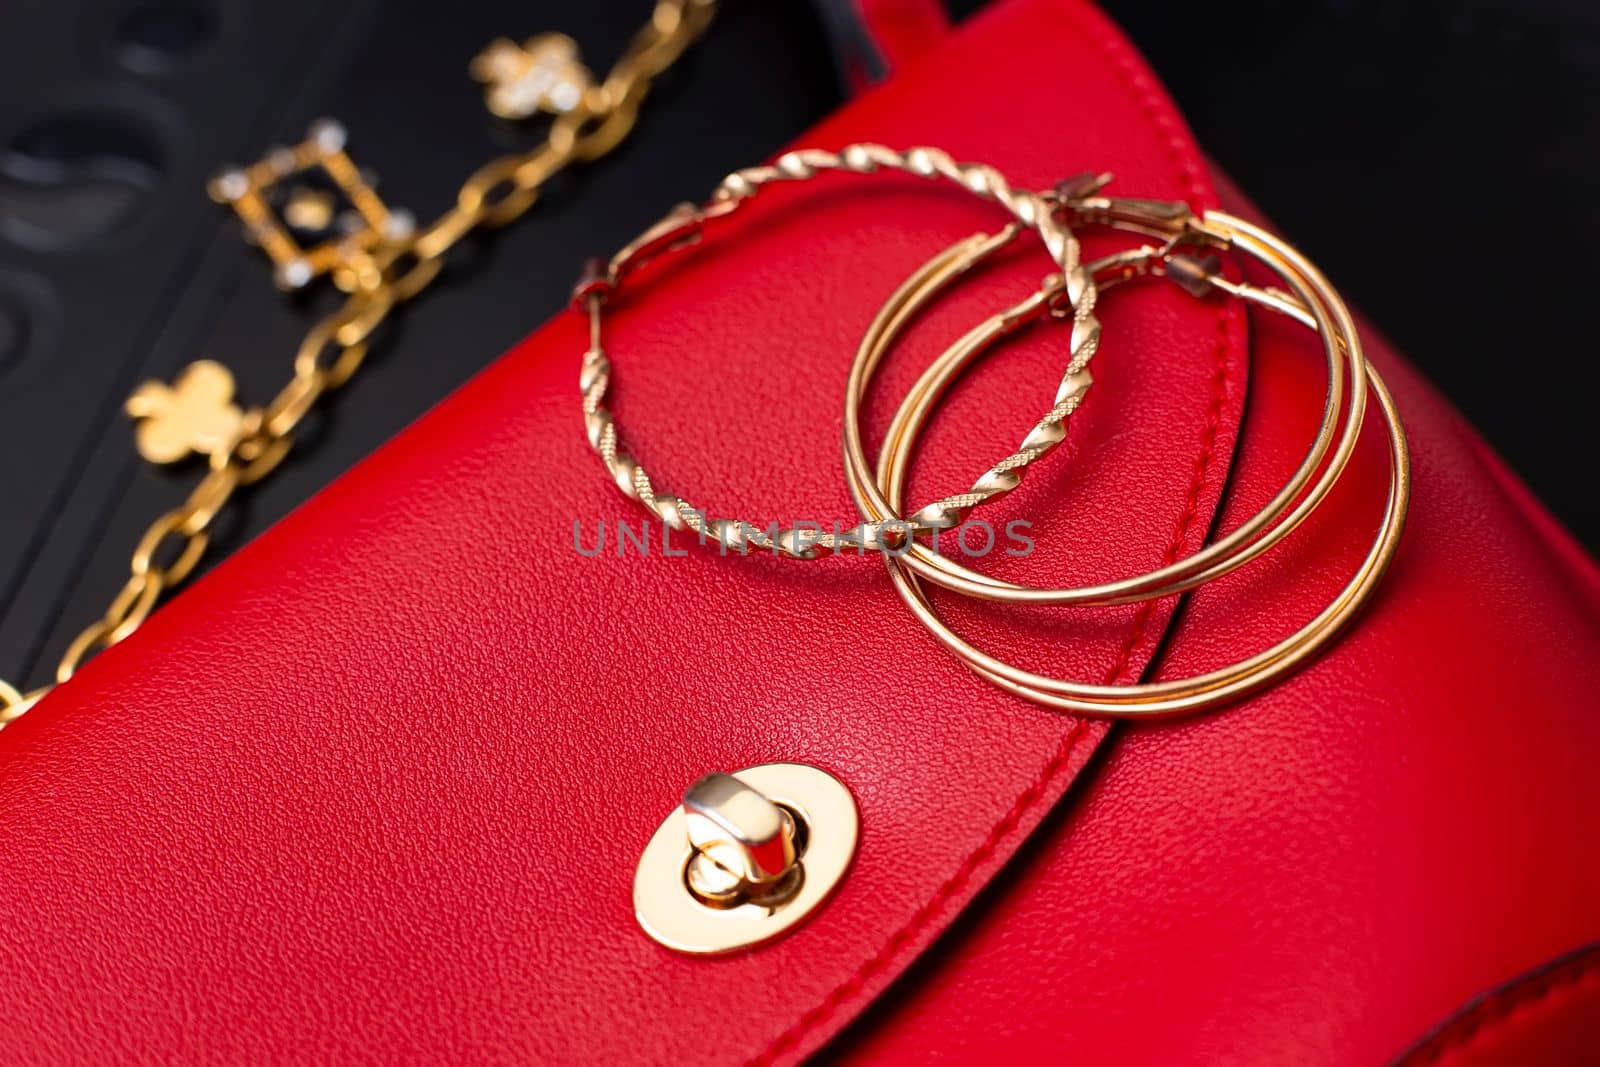 Gold ring earrings and costume jewelry lie on a little red leather bag. Close up